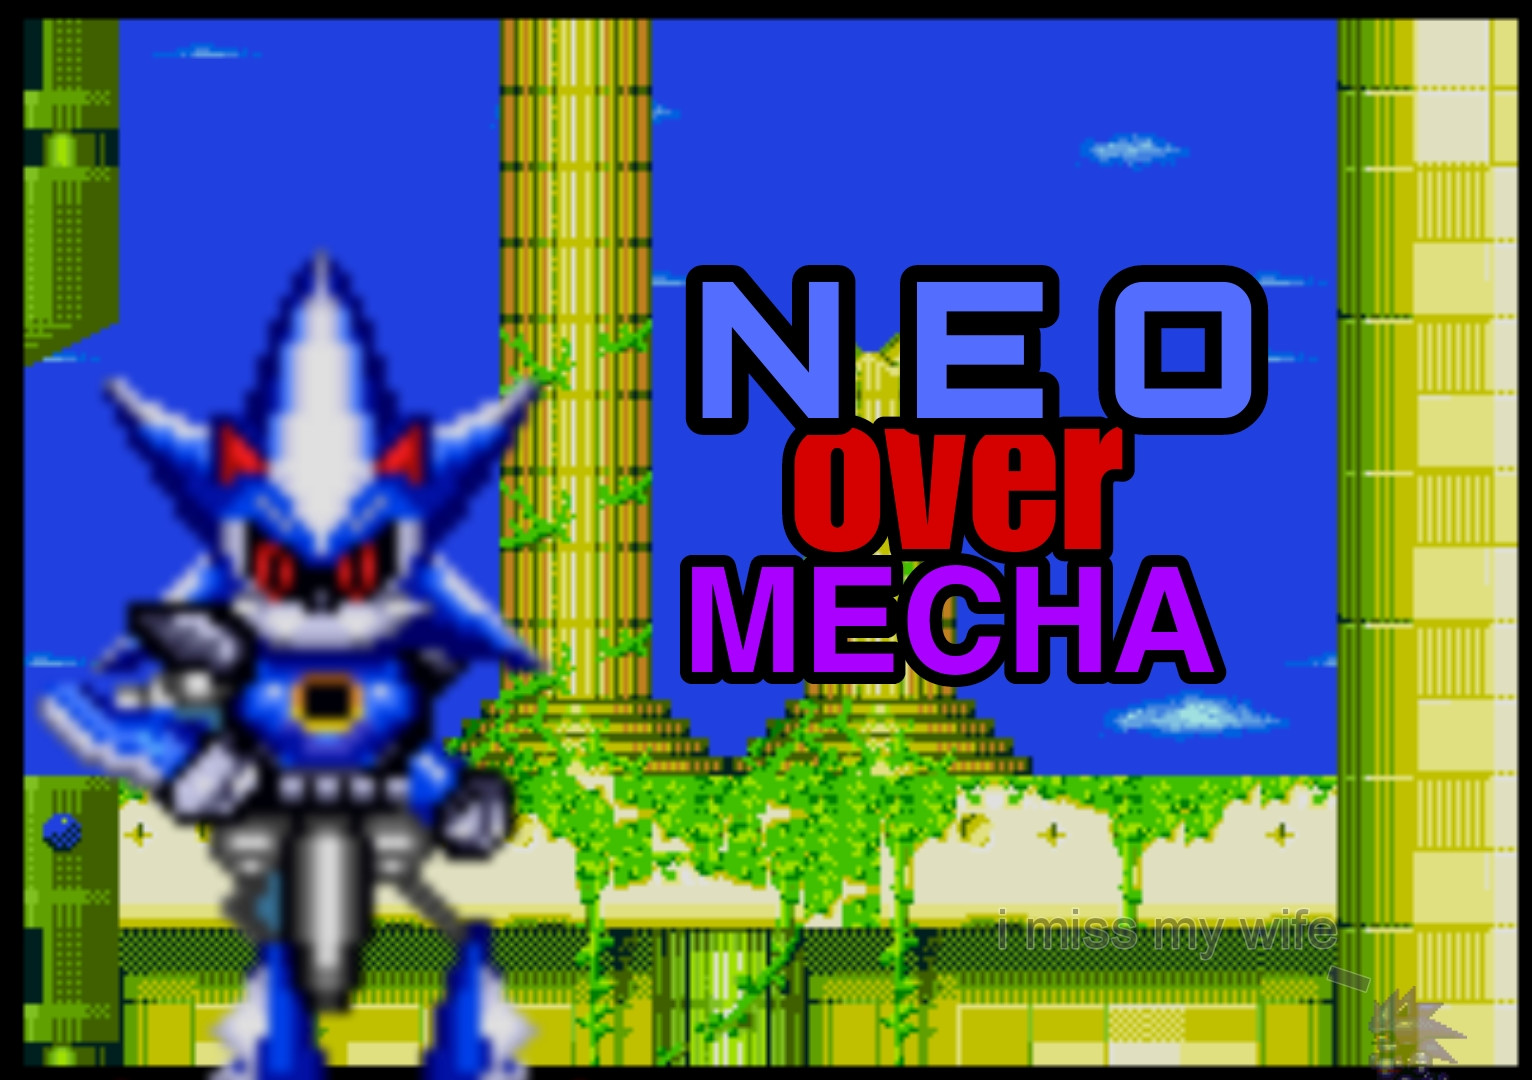 Super neo metal sonic and metal overlord over ddz [Sonic 3 A.I.R.] [Mods]